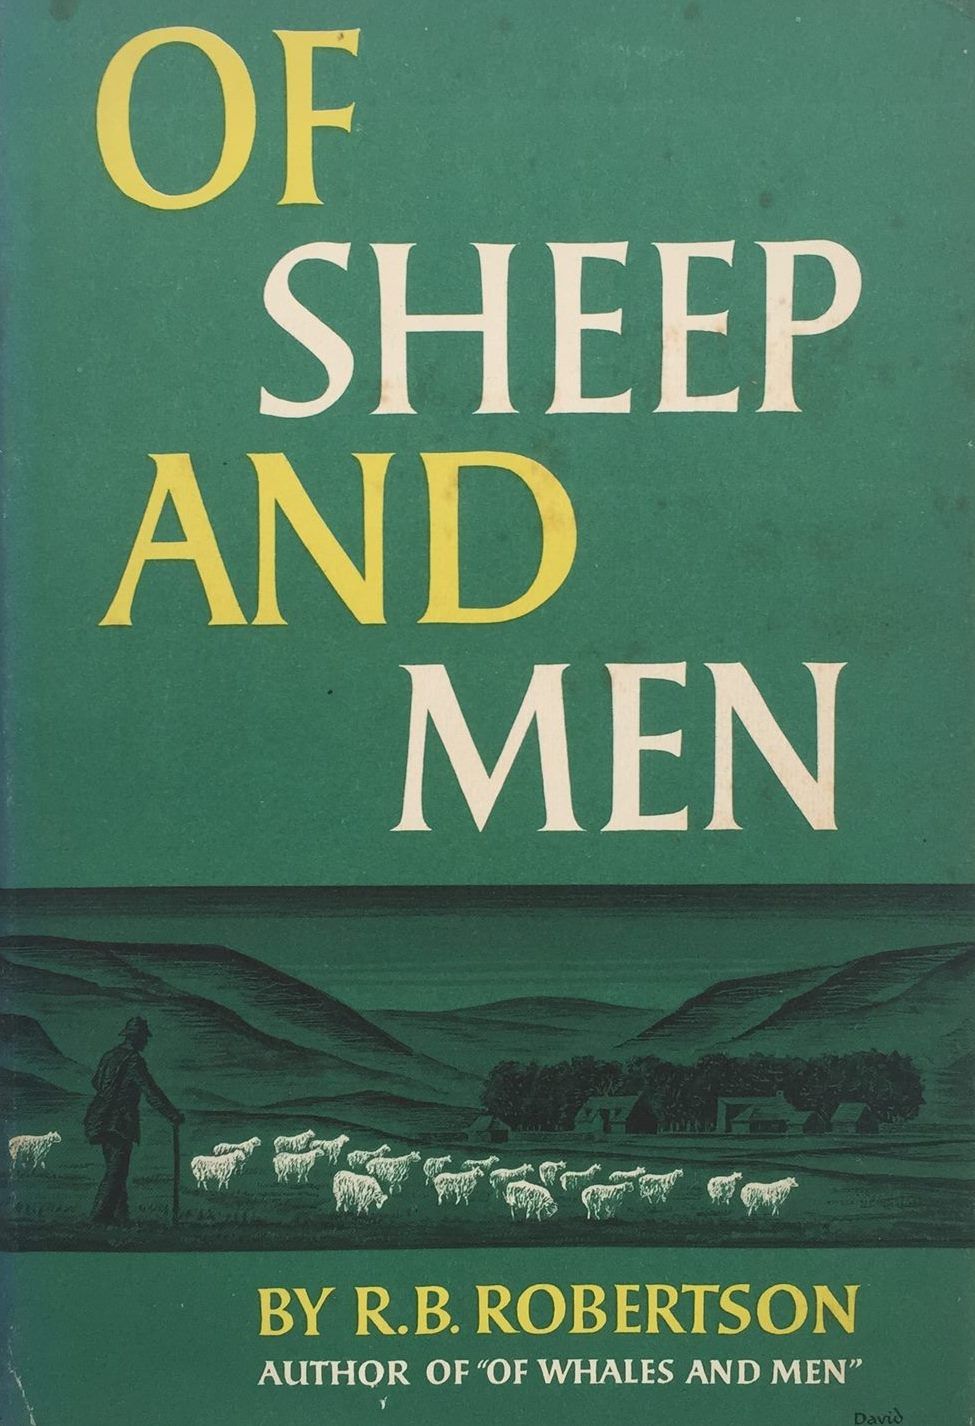 OF SHEEP AND MEN